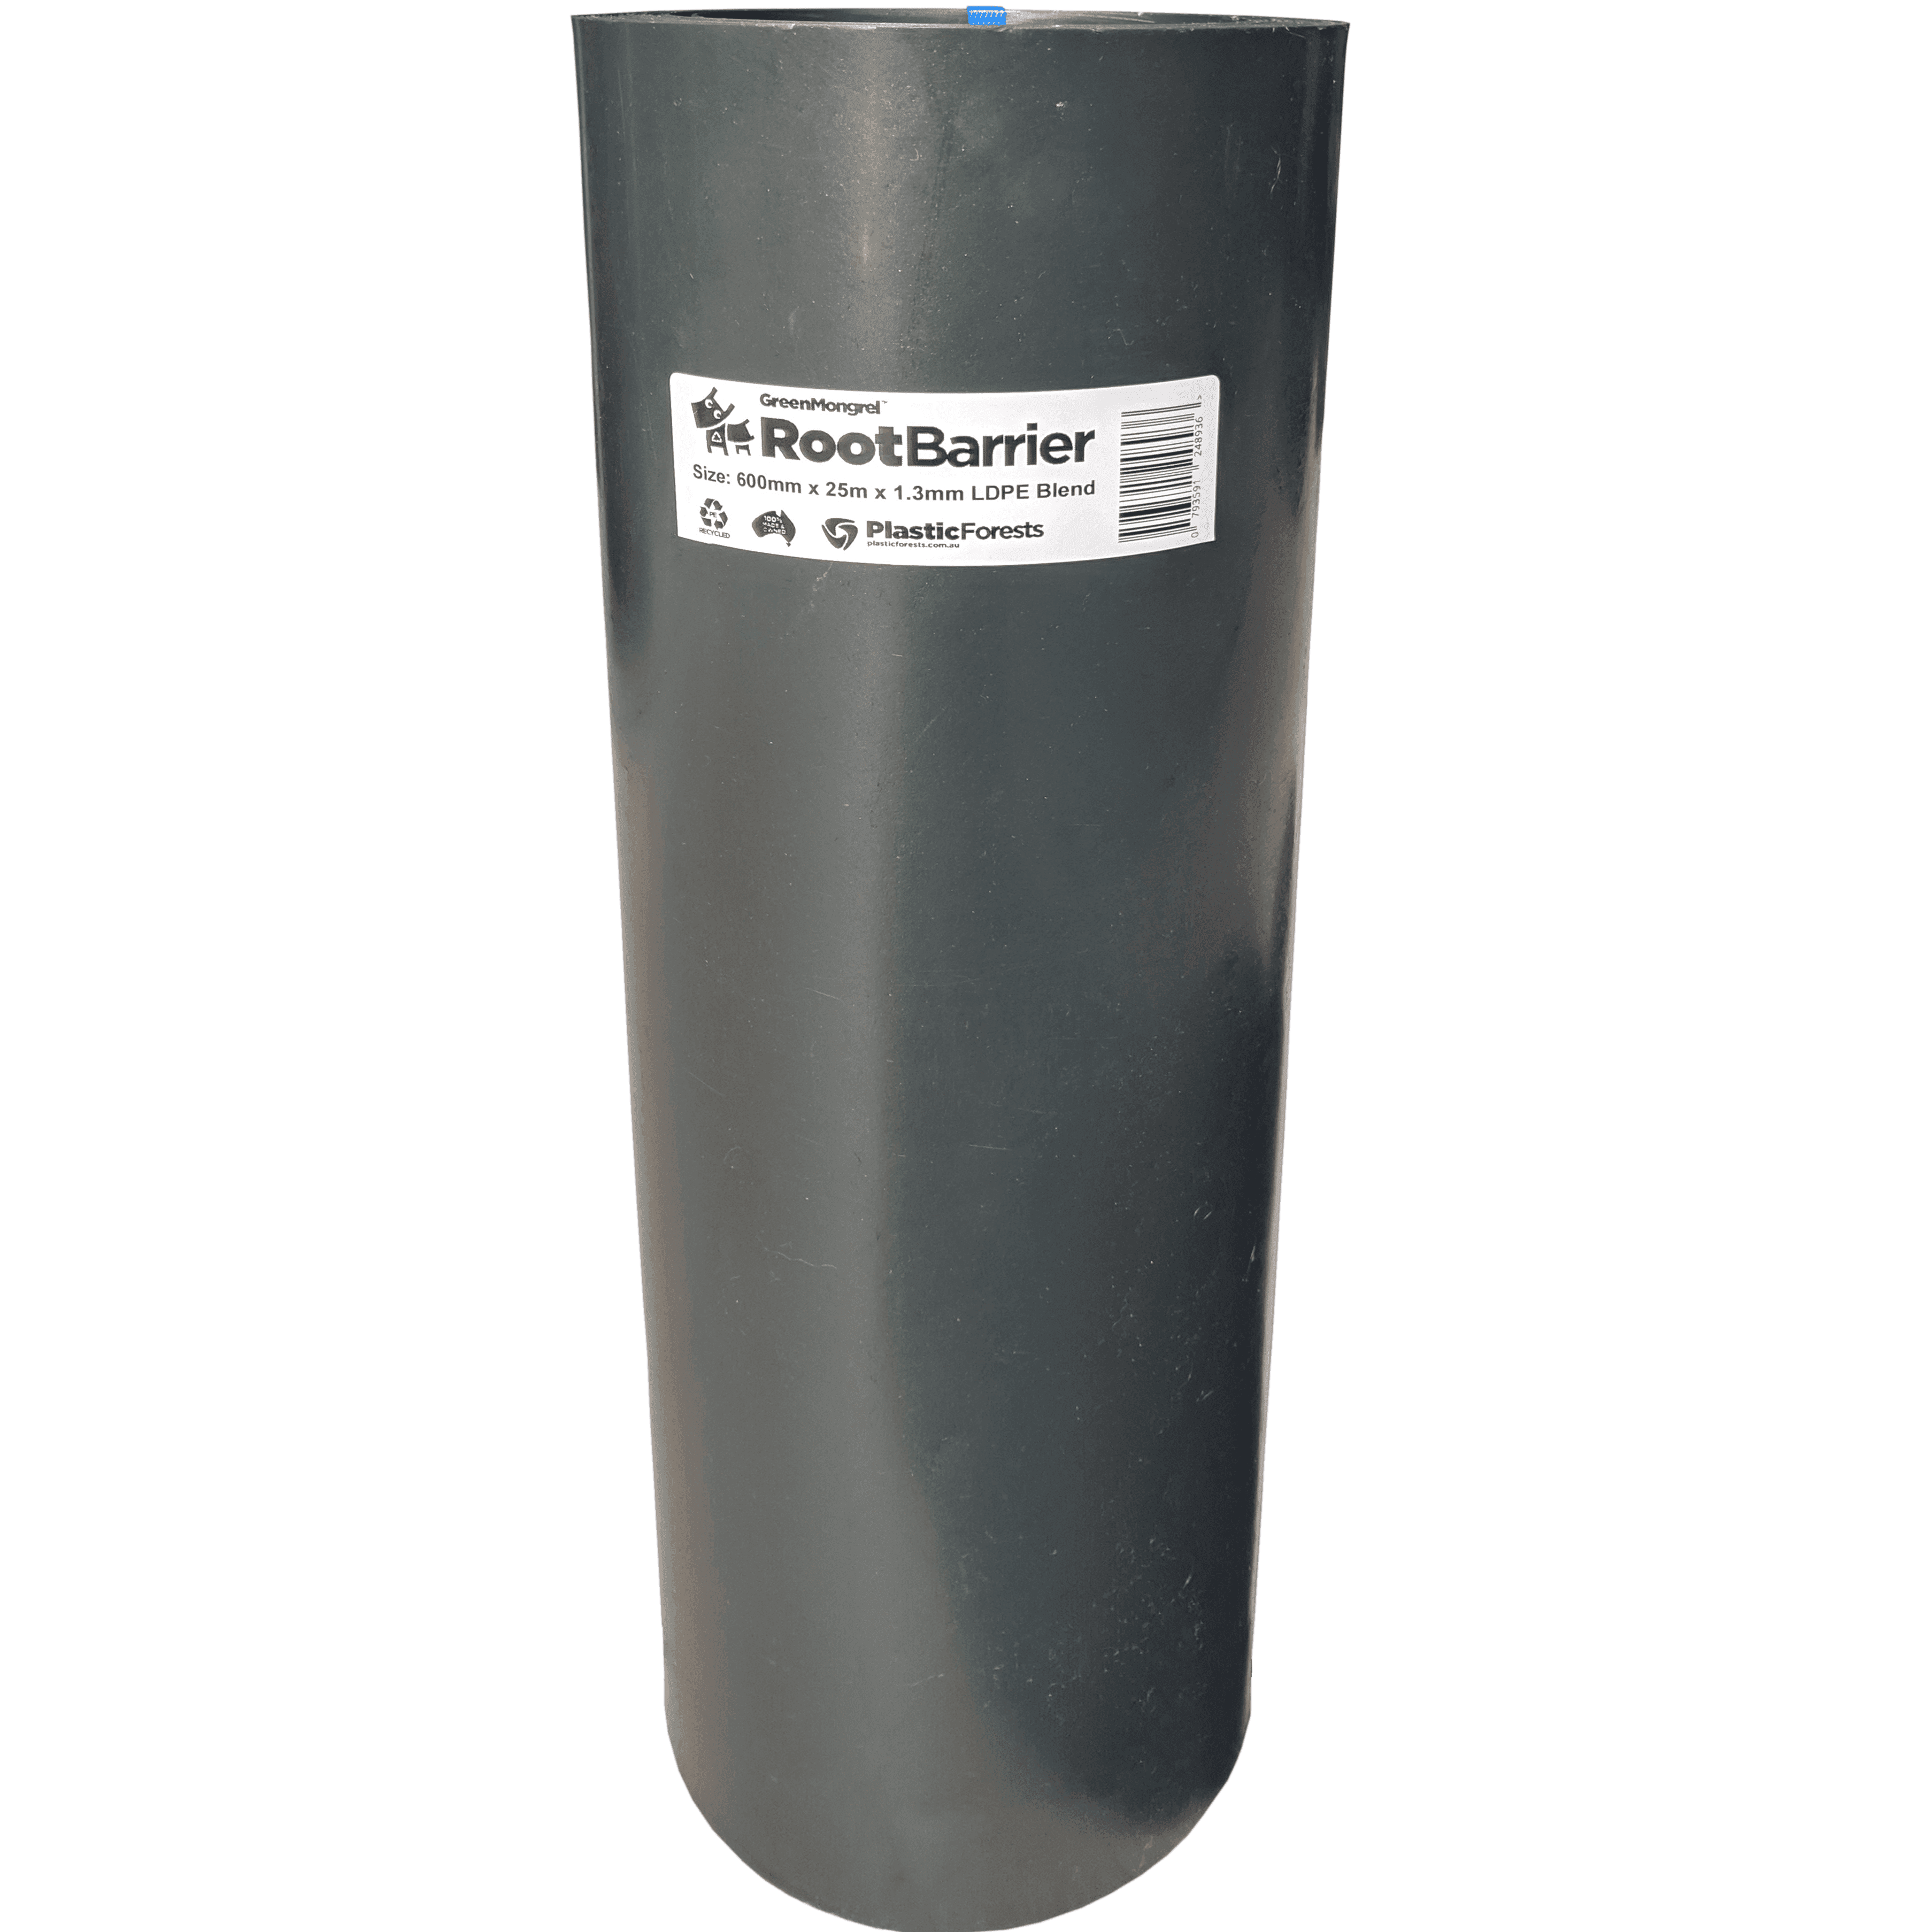 Aus Made 600mm x 12m x 3mm Root Barrier Super Heavy Duty Recycled plastic 